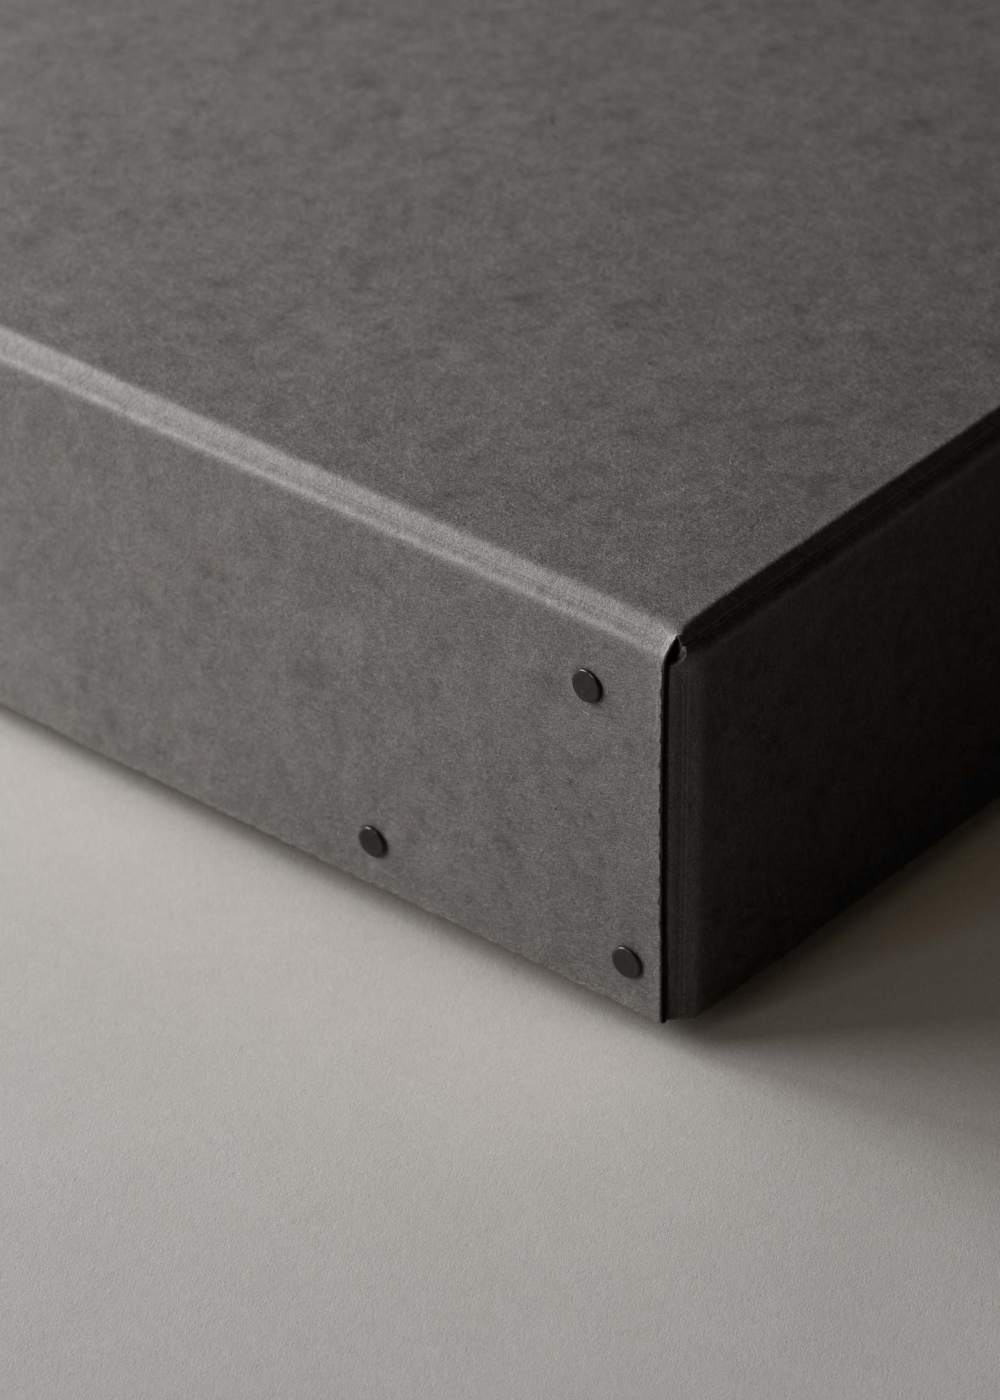 FROME Archival storage box "Rivet Box" - Charcoal Gray